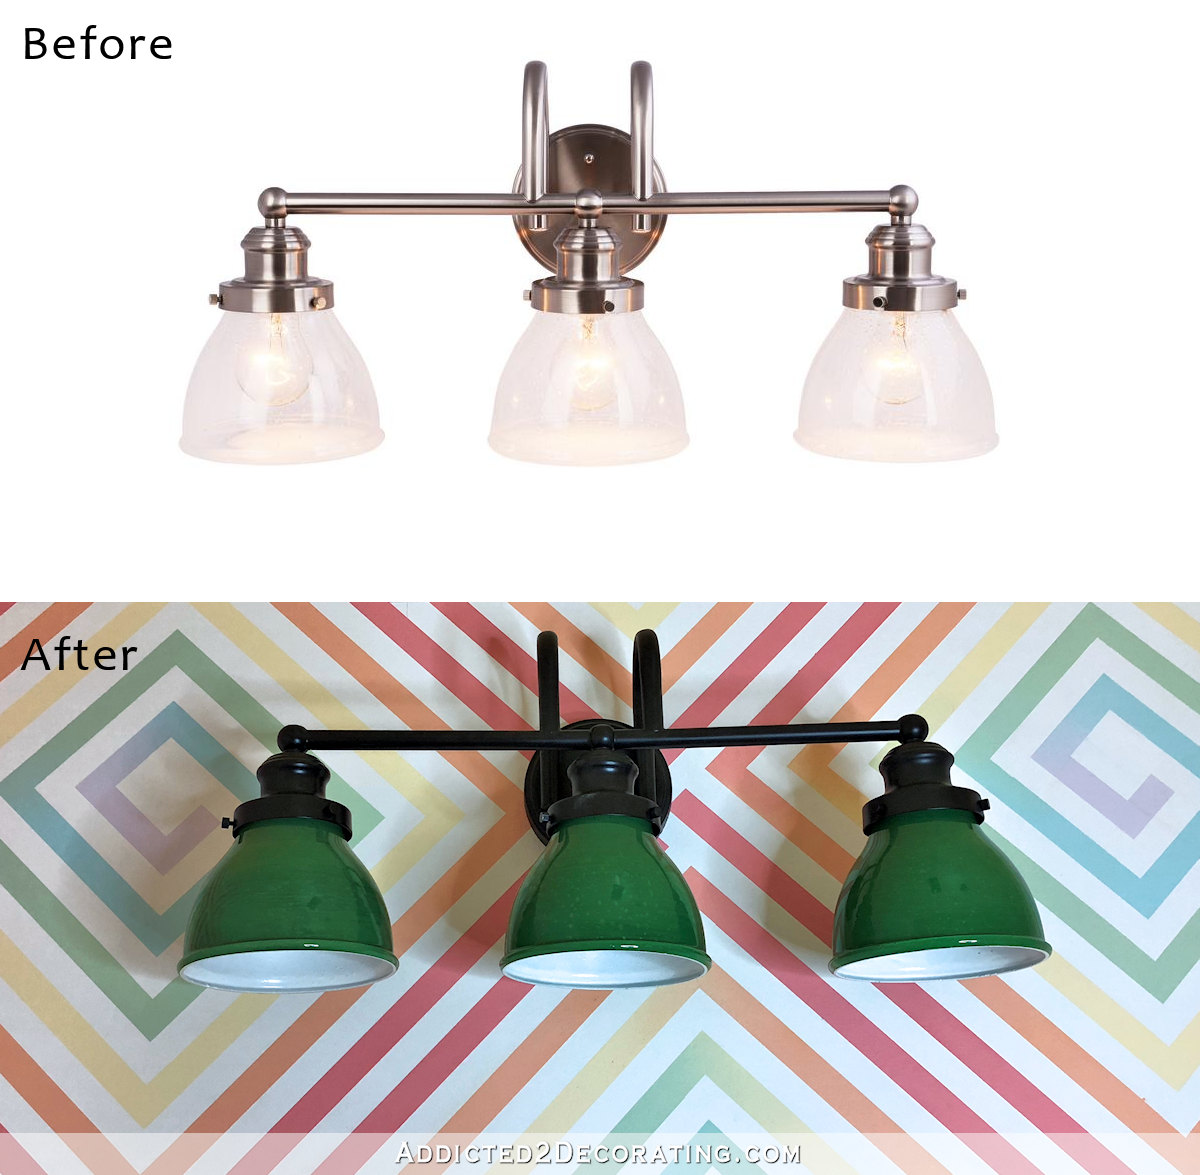 vanity light makeover - before and after - chrome to black with green glass